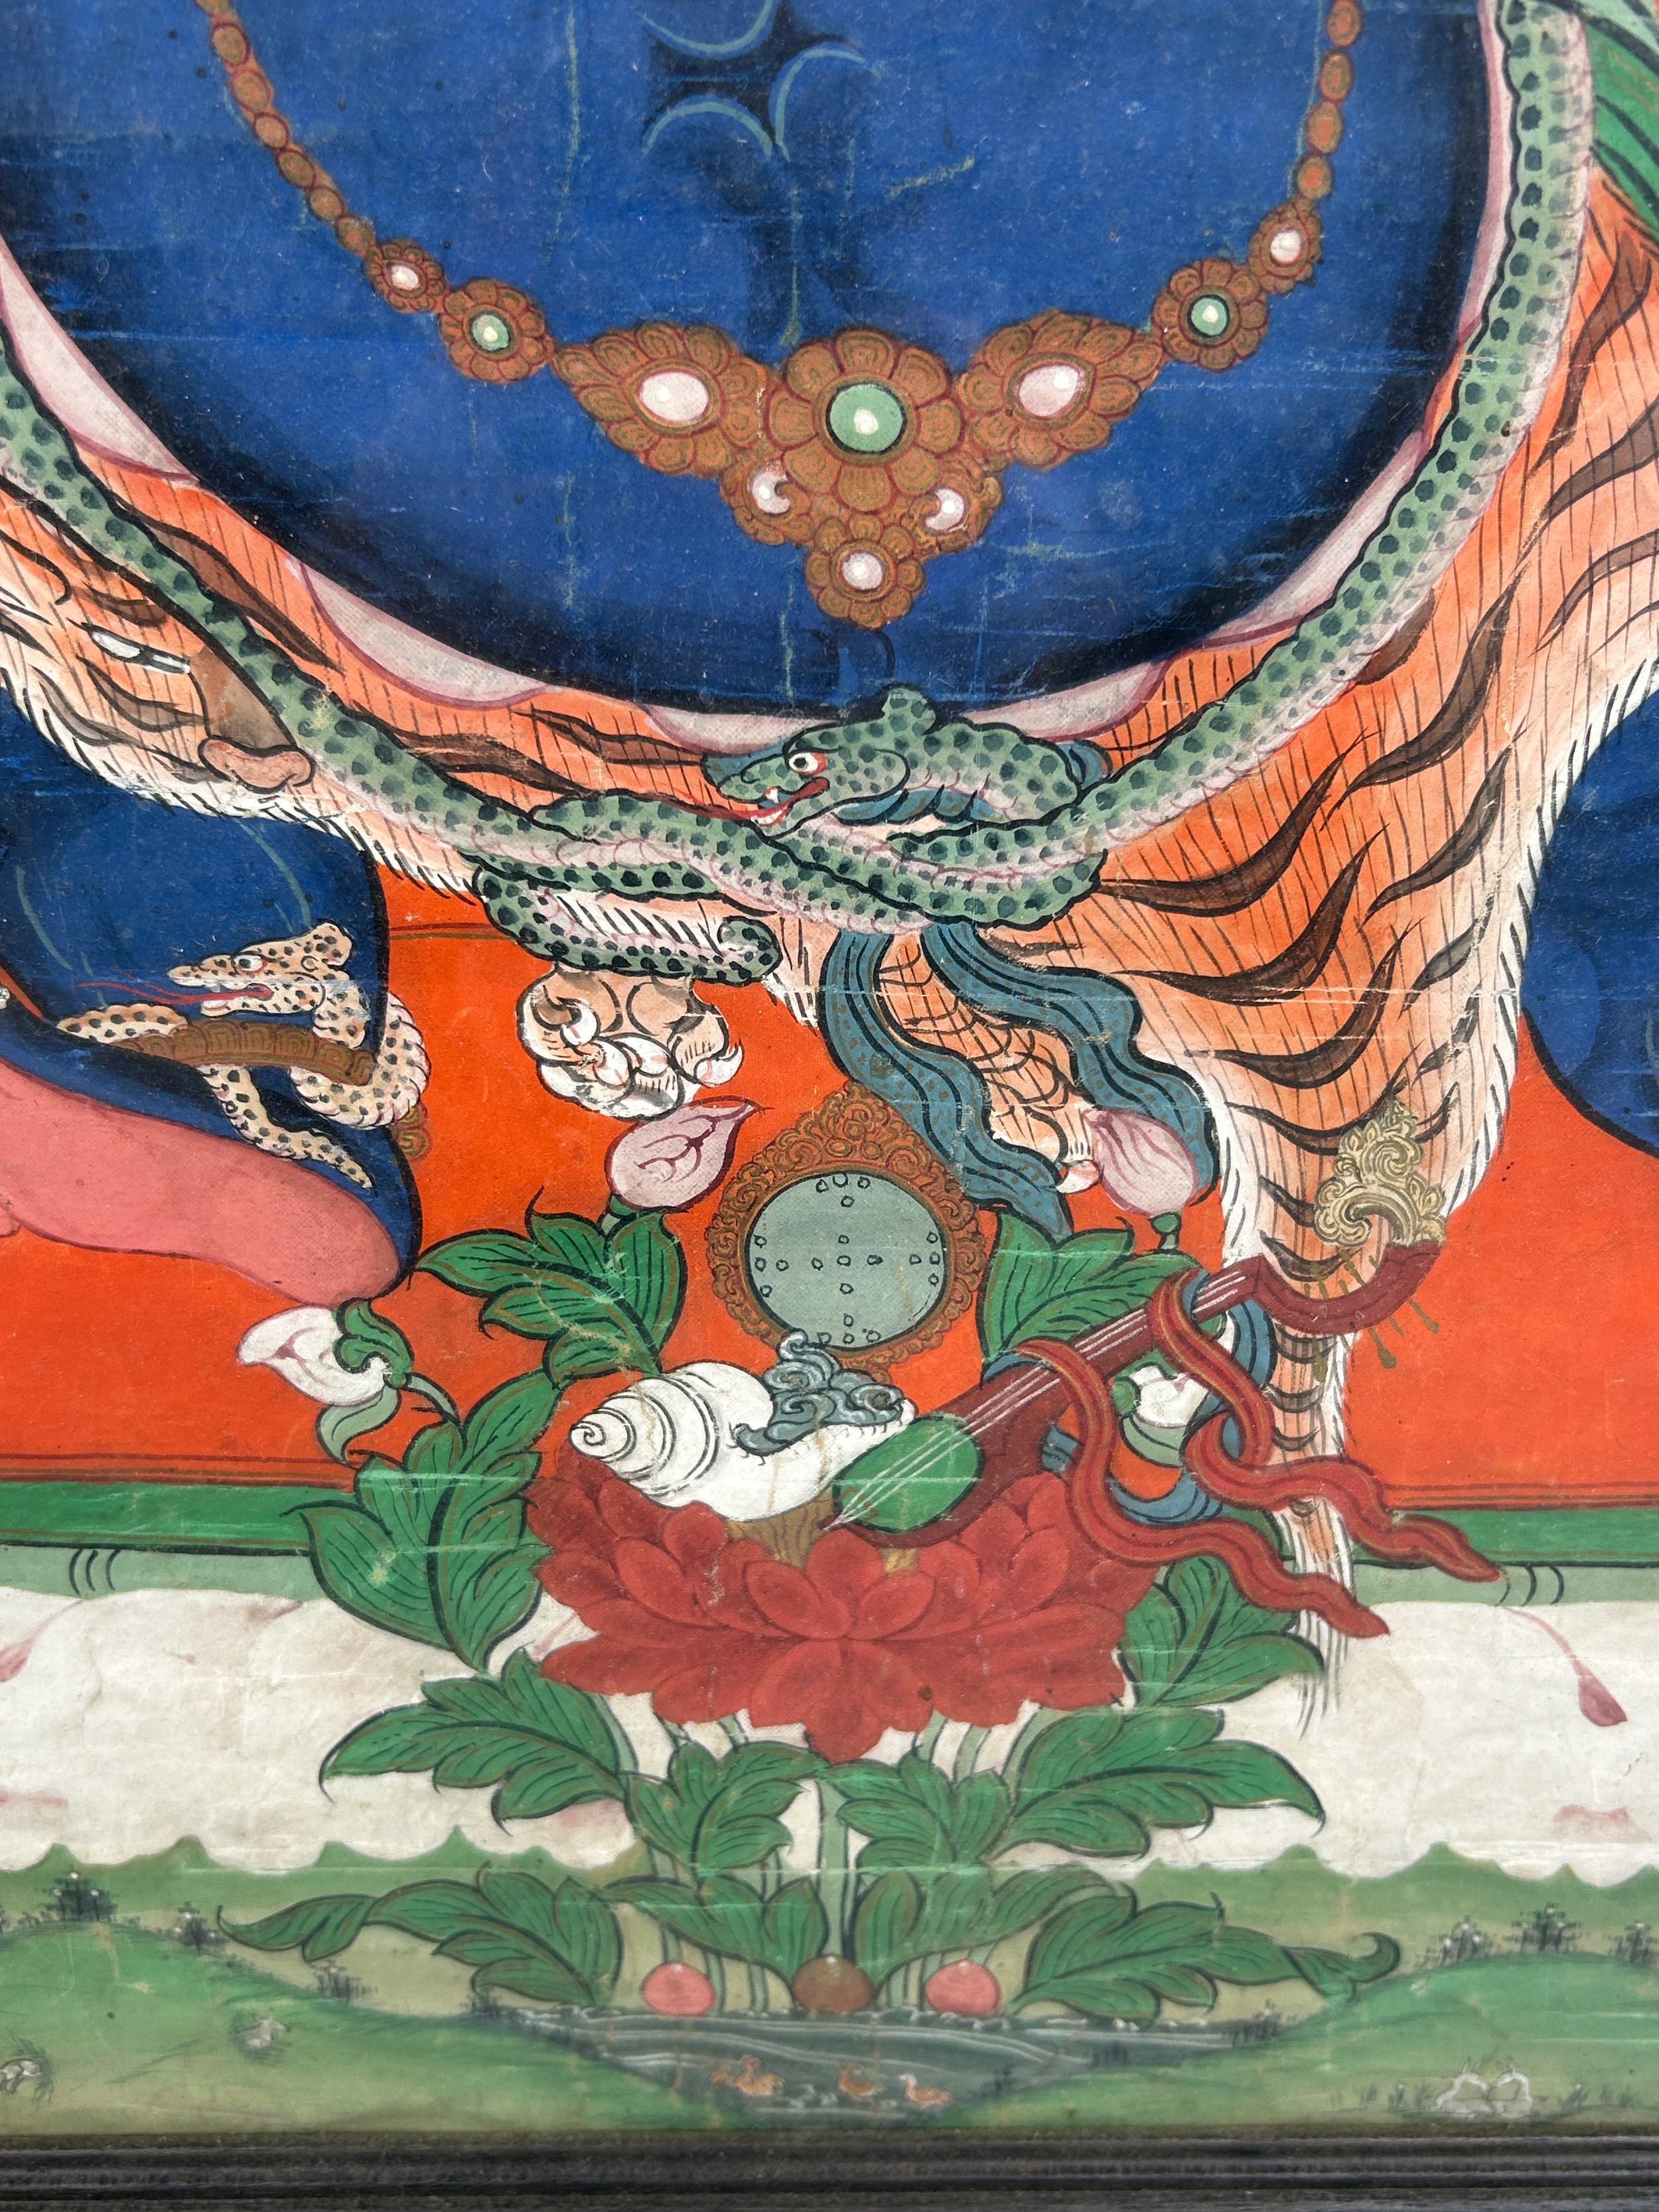 A CHINESE 19TH CENTURY THANGKA DEPICTING THE BODHSATTVA VAJRAPANI FROM TIBET, 60cm x 40cm - Image 4 of 10